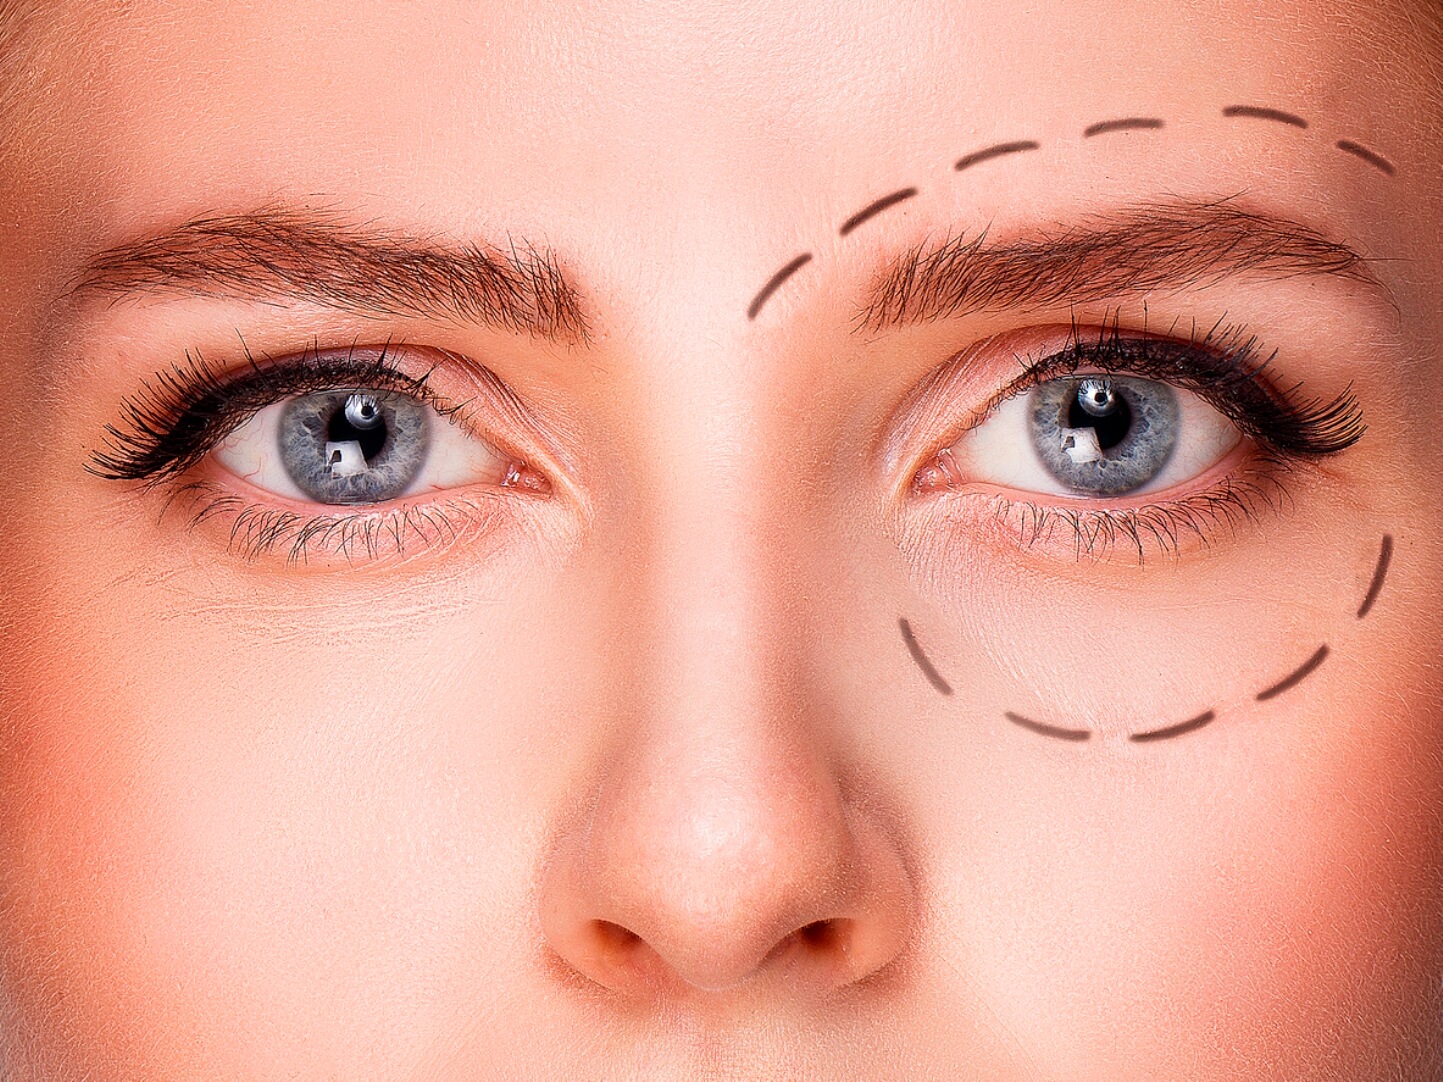 Bothered by Droopy Eyelids? Here Are 3 Alternatives to Eye Surgery